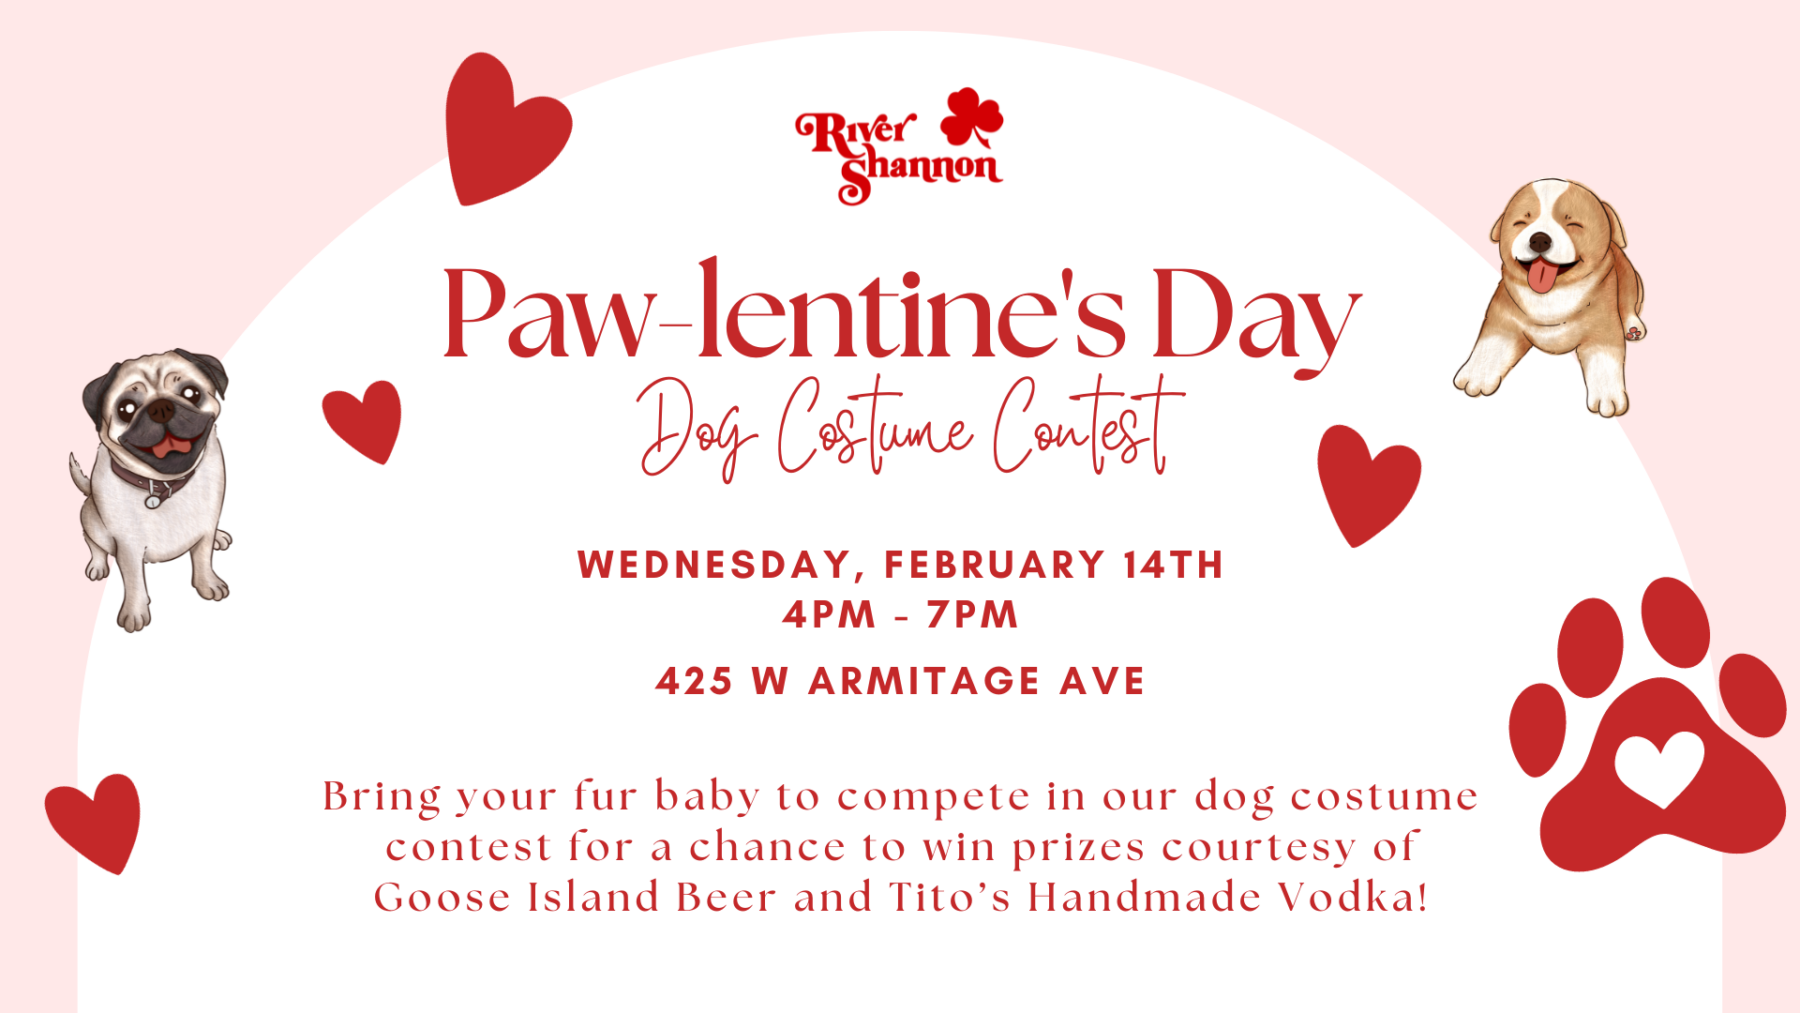 RS Paw-lentine’s Day